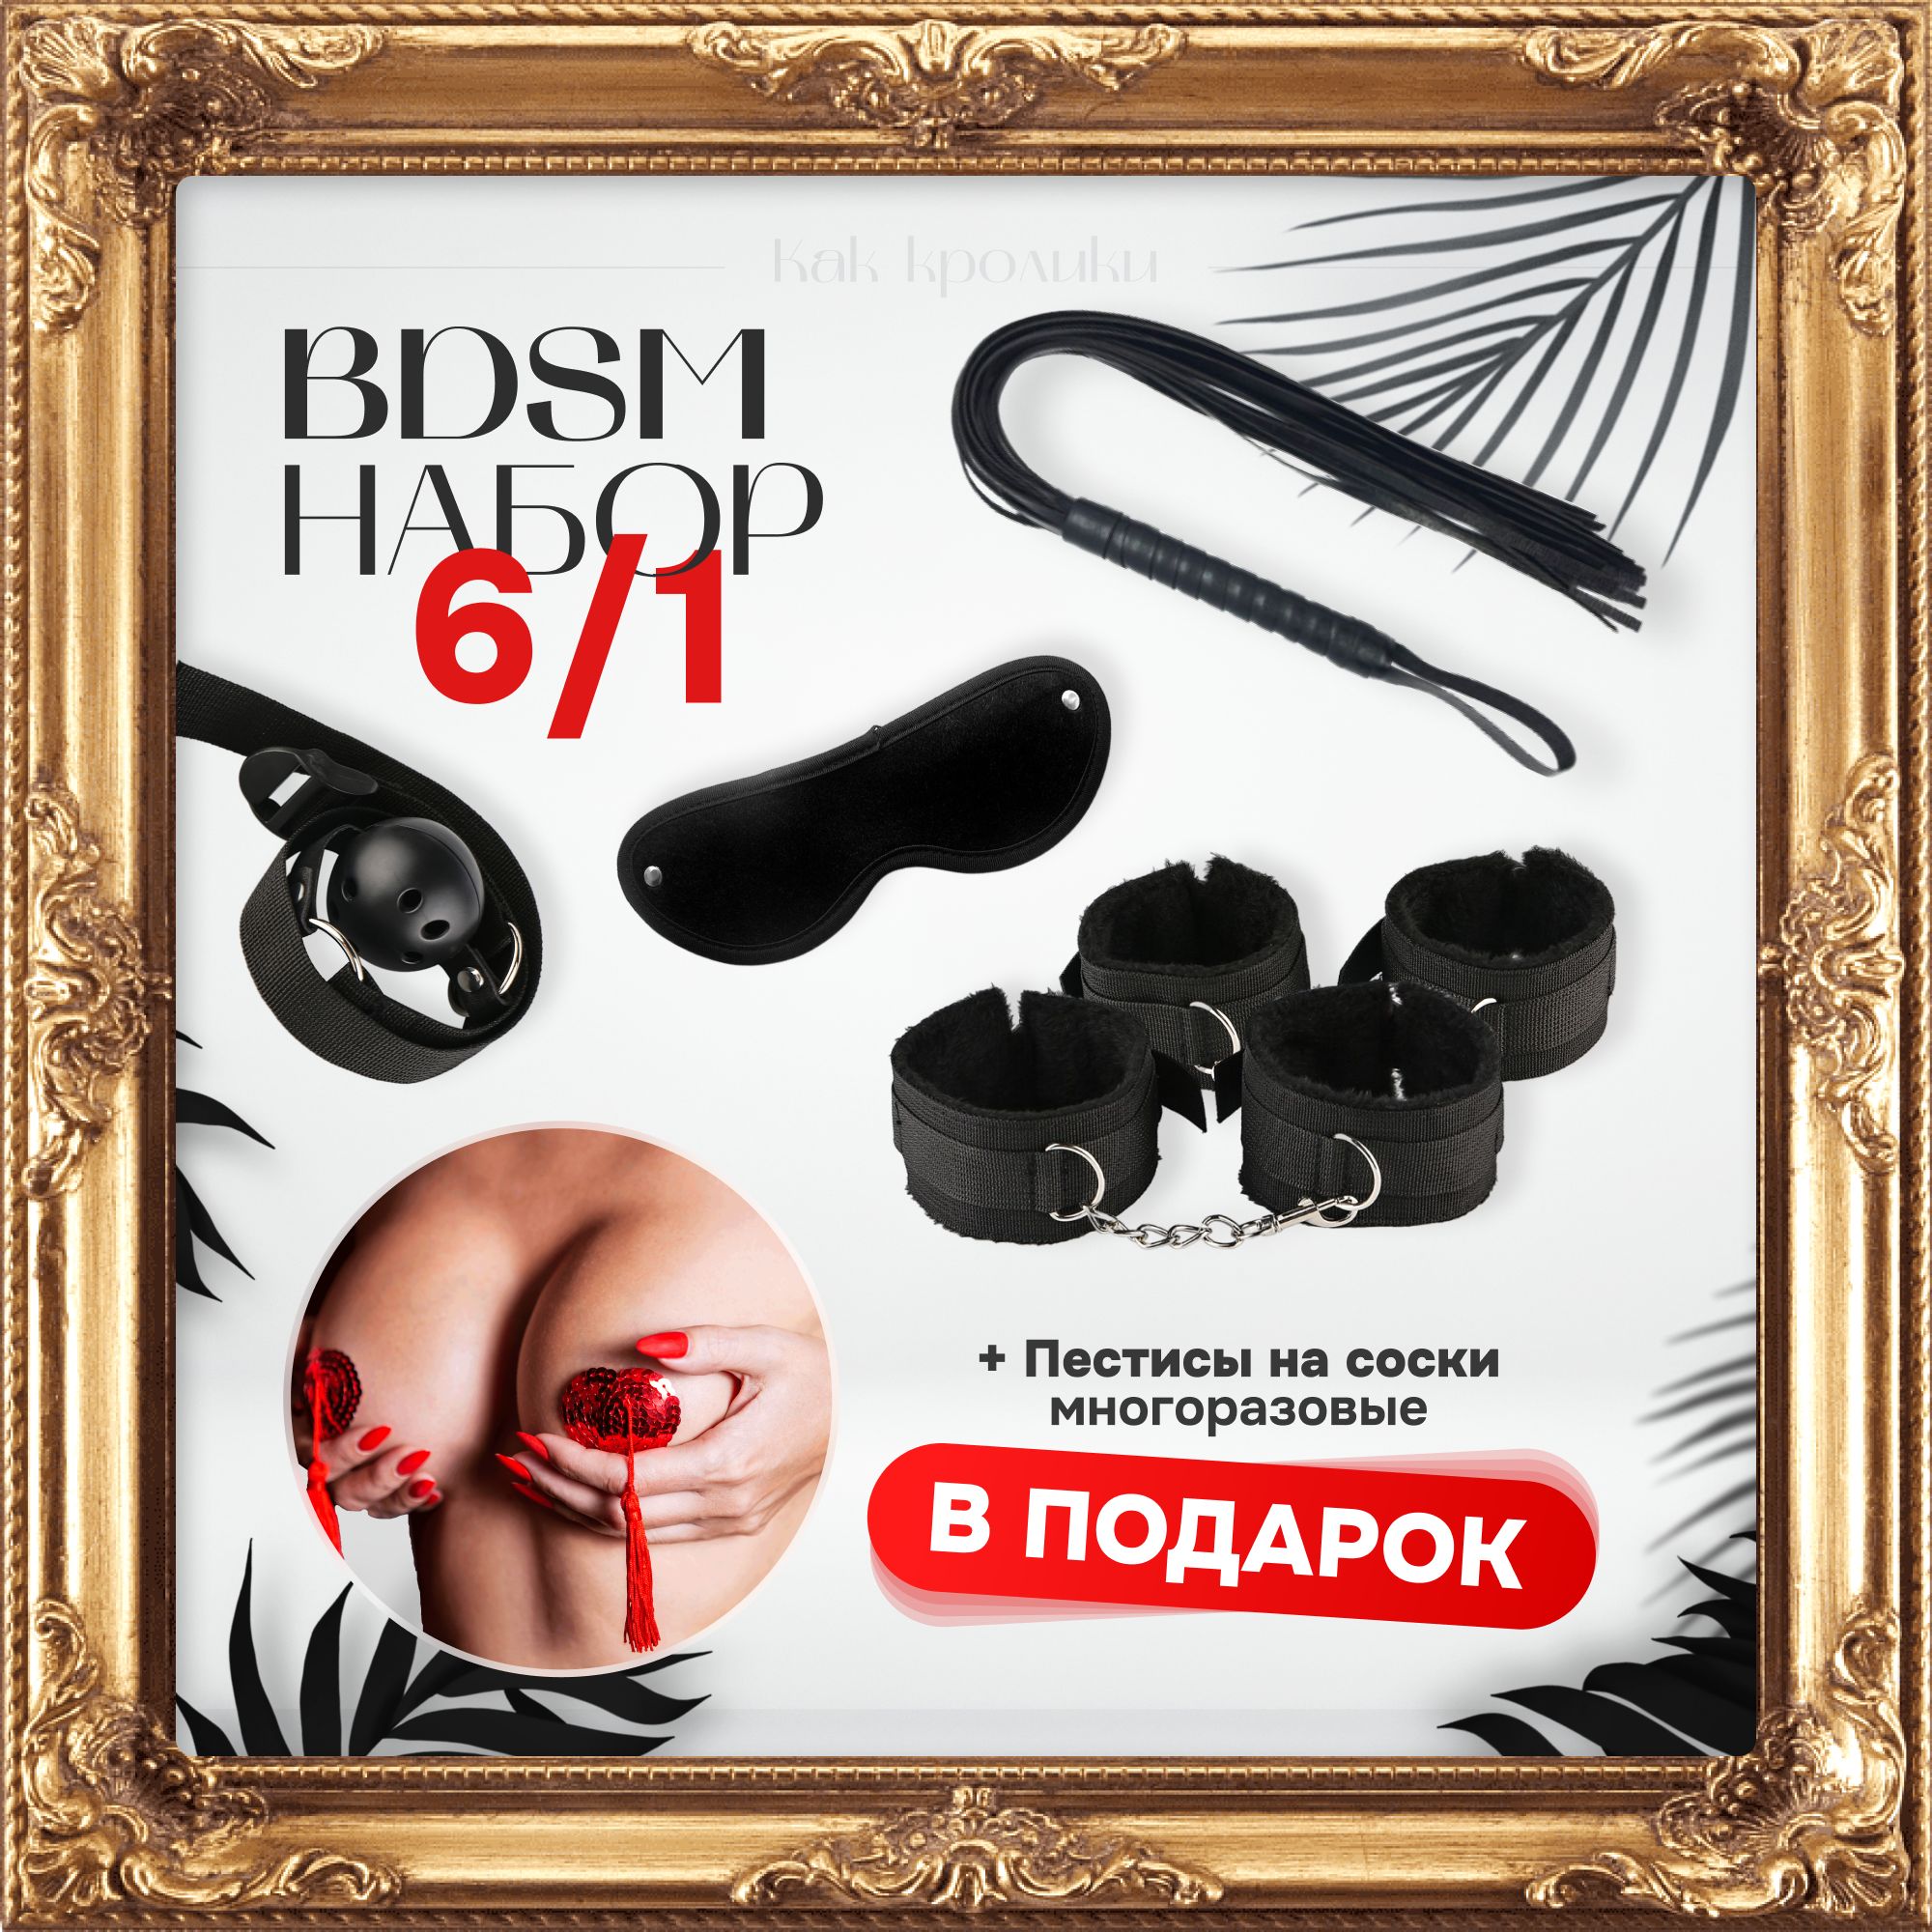 Best gifts for sir bdsm